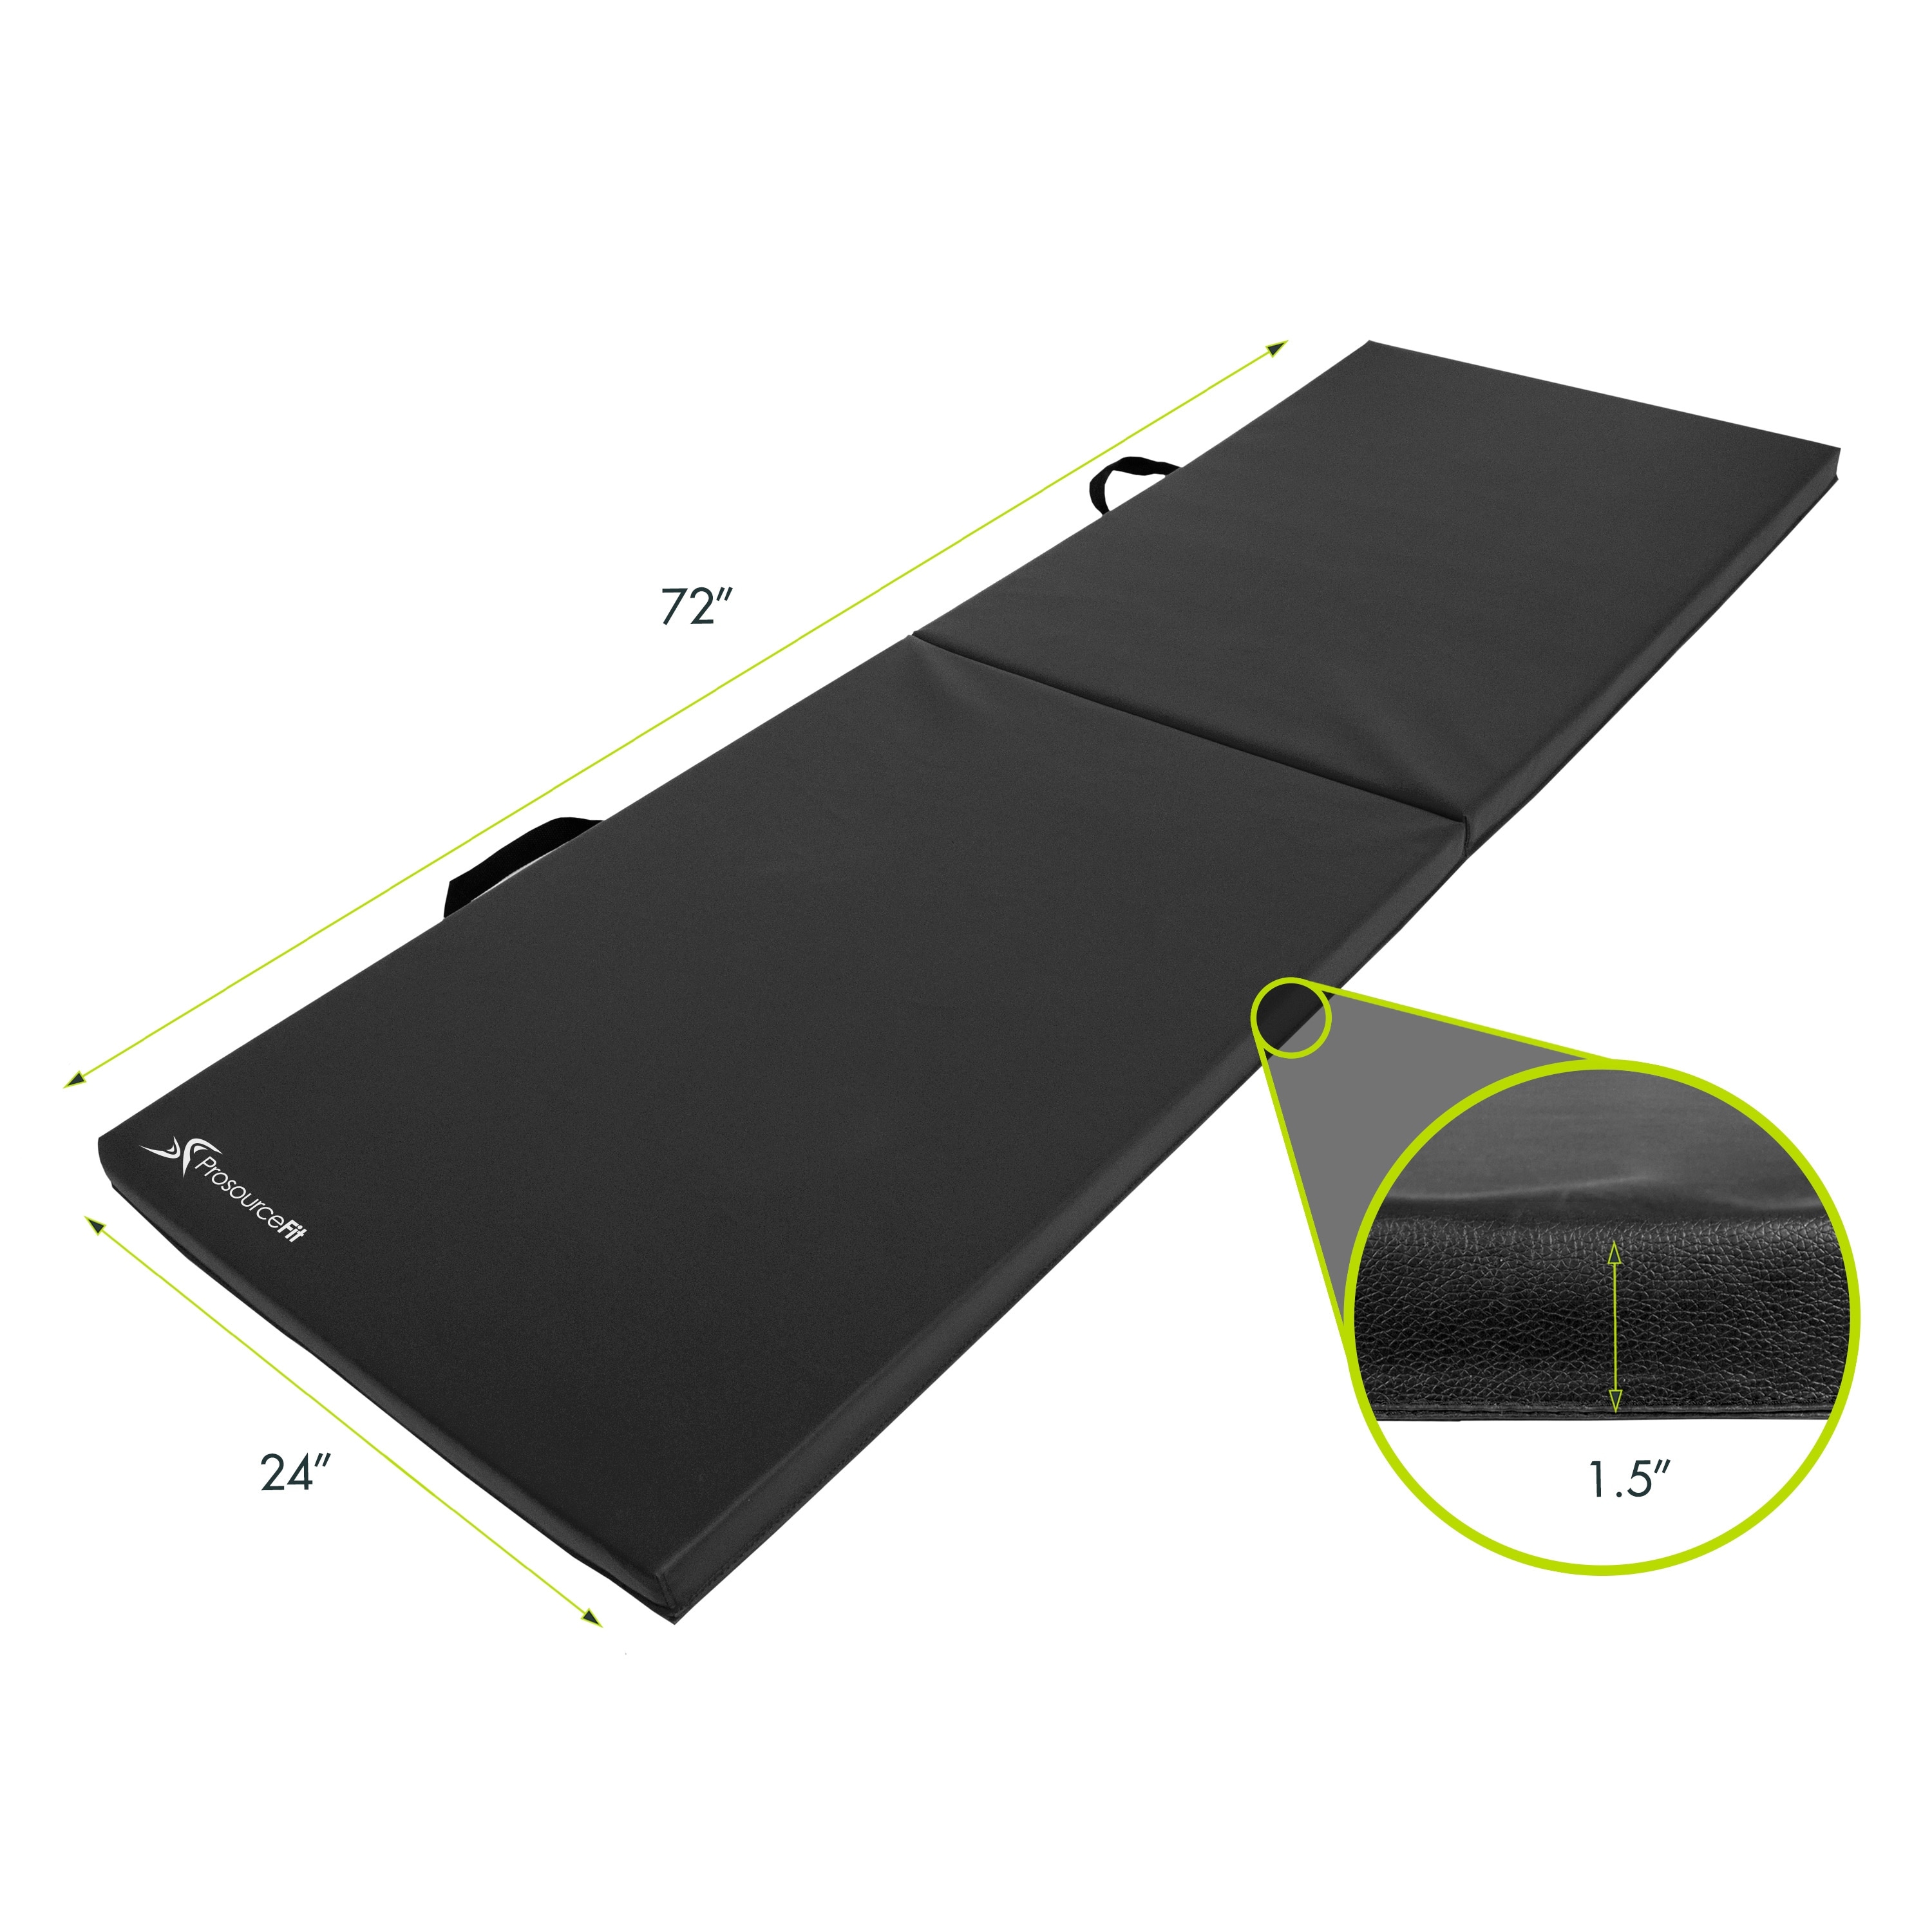 https://ak1.ostkcdn.com/images/products/is/images/direct/f896a2de21204444fa9c7947339dea56ef6d356d/ProsourceFit-Bi-Fold-Thick-Exercise-Mat-6%22x2%22-with-Carrying-Handles.jpg